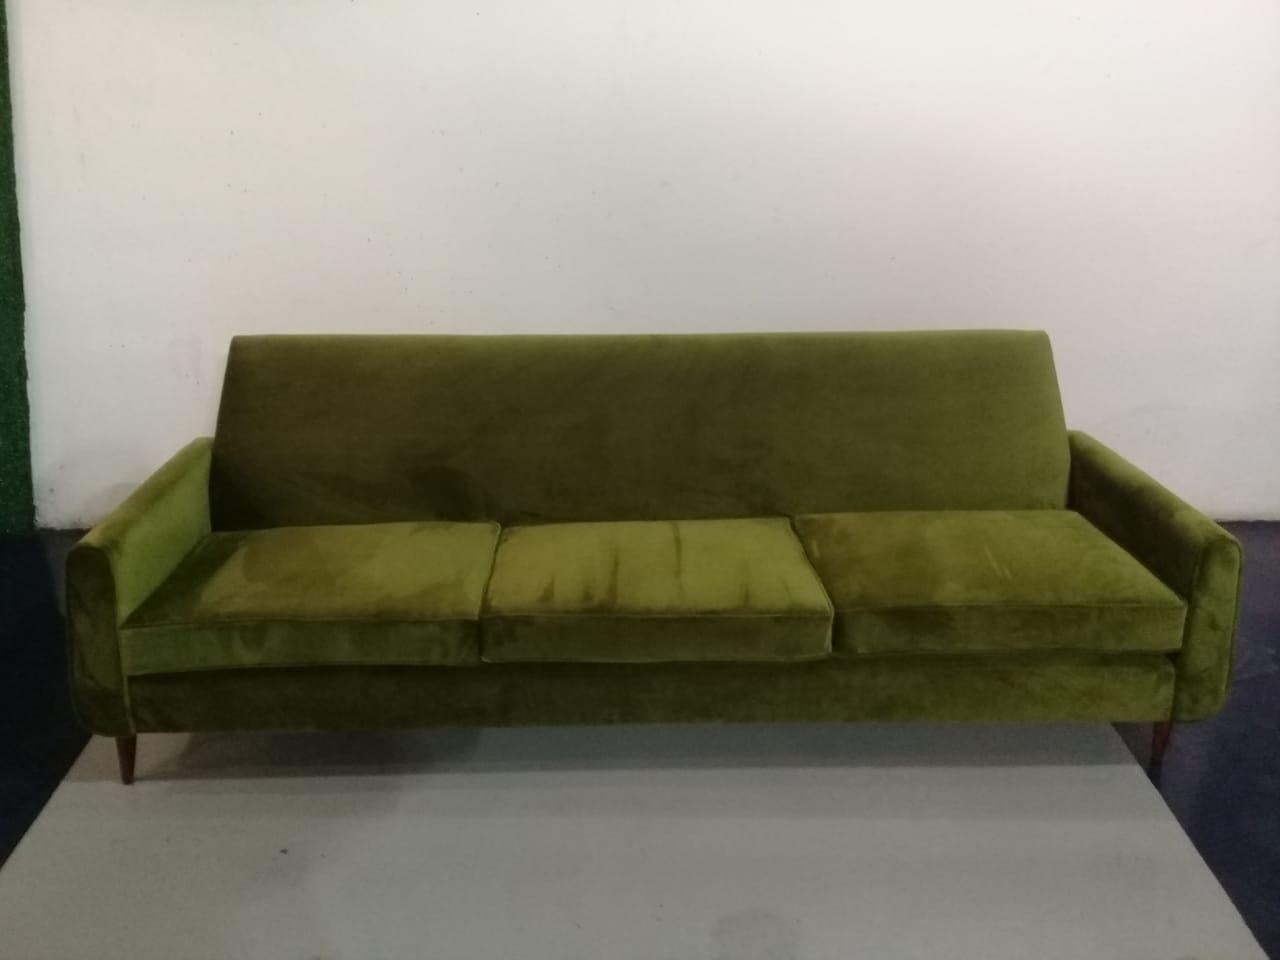 This sofa made by designer has three seats and 